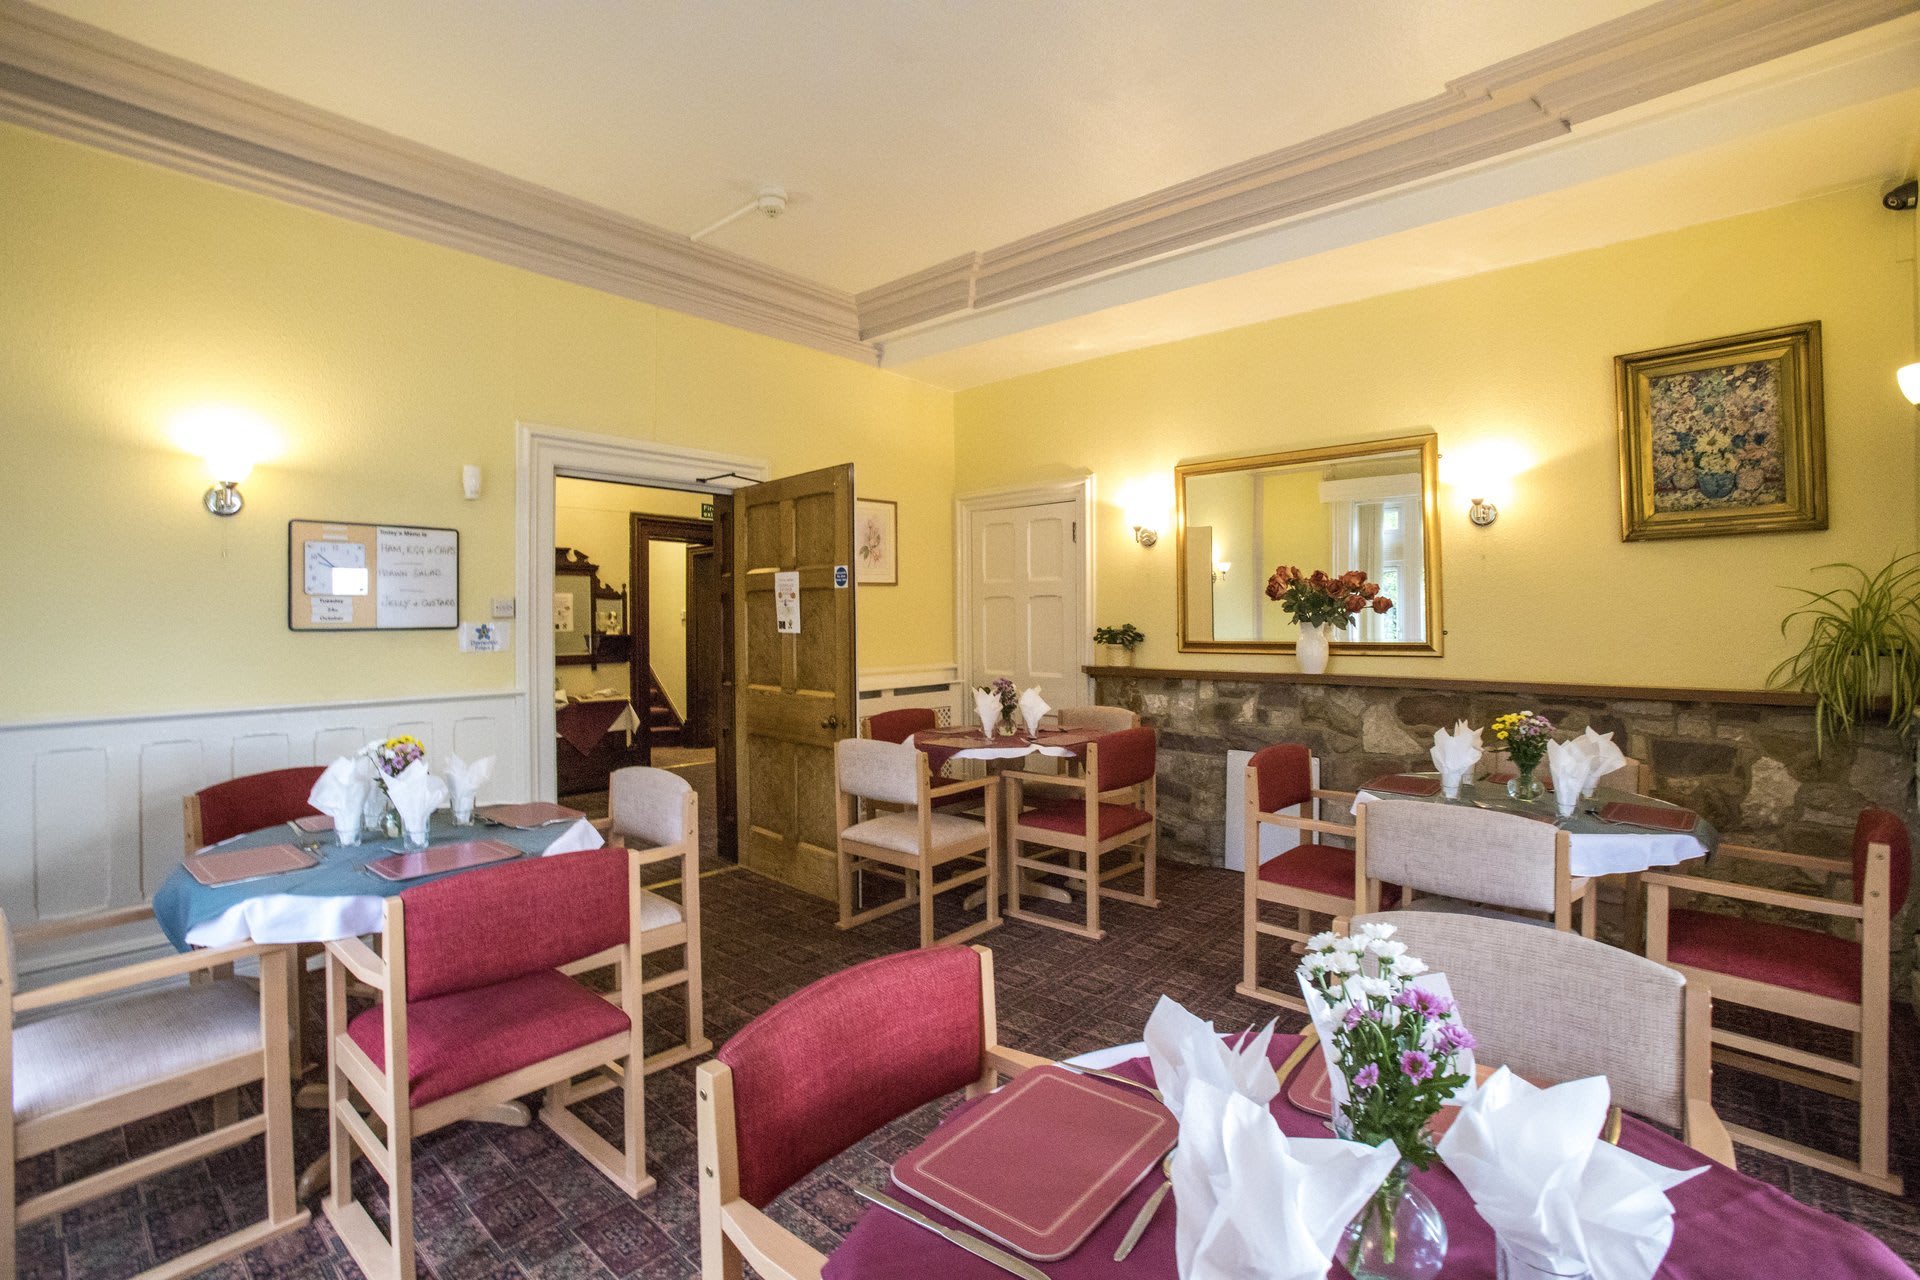 Images Far Fillimore Care Home